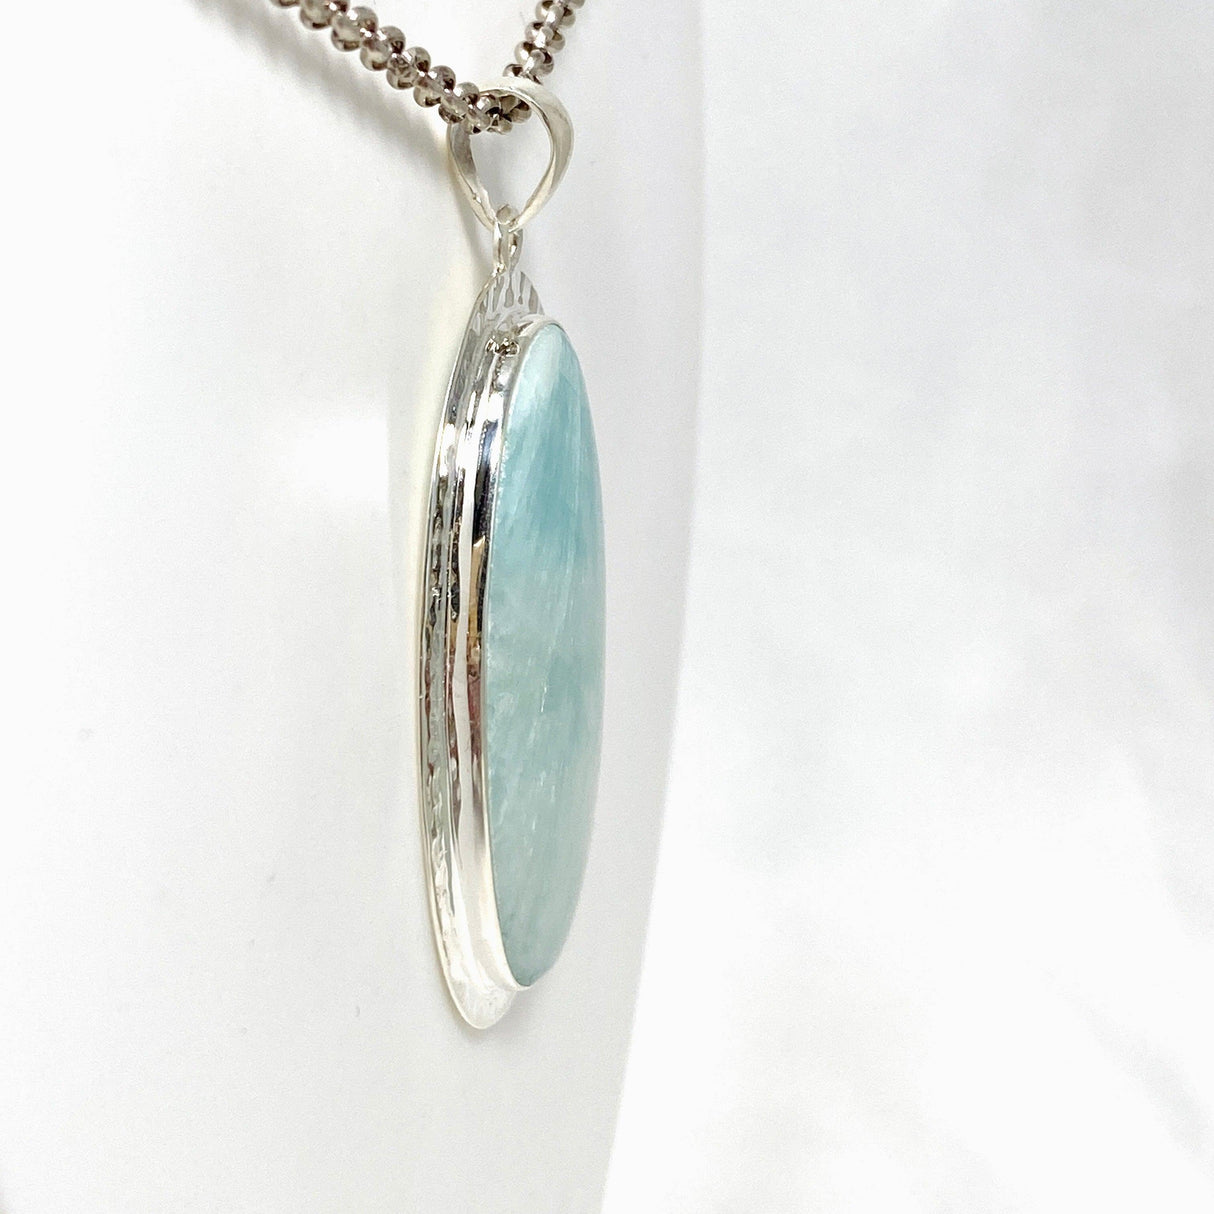 Blue Aragonite Oval Pendant in A Hammered Setting KPGJ4467 - Nature's Magick